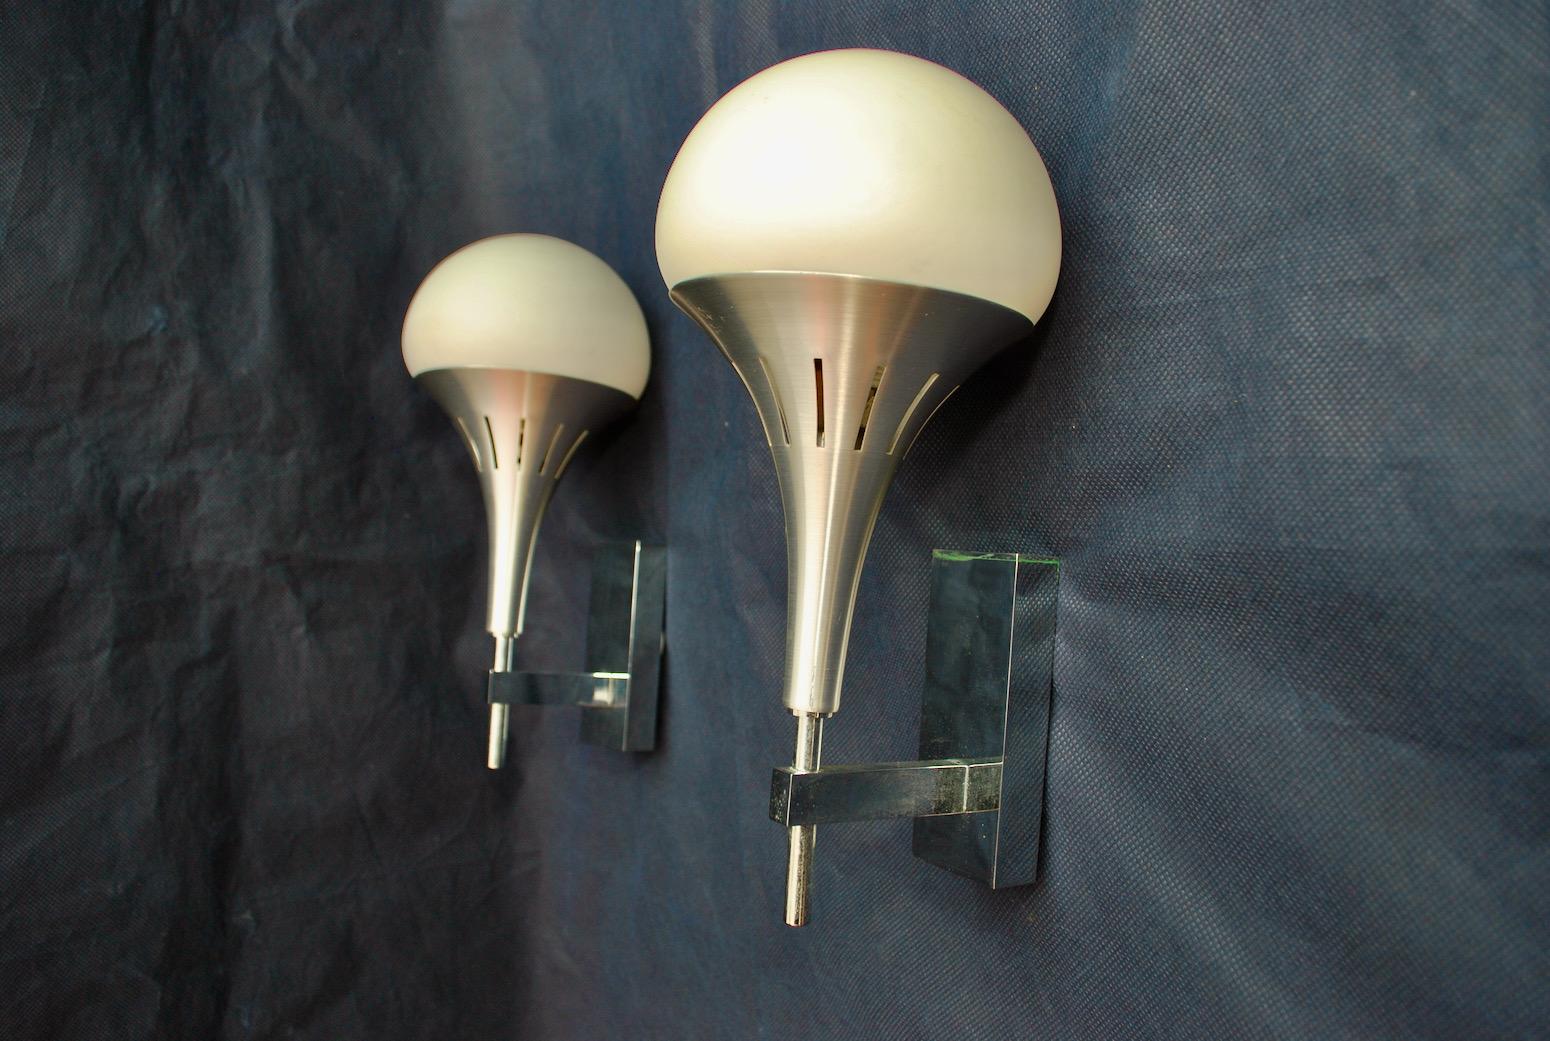 A beautiful and Elegant pair of 1970's sconces, design by Sciolari, the glass is white, see on one picture, I don't know why but on the pictures it appears cream color, when actually it is white.